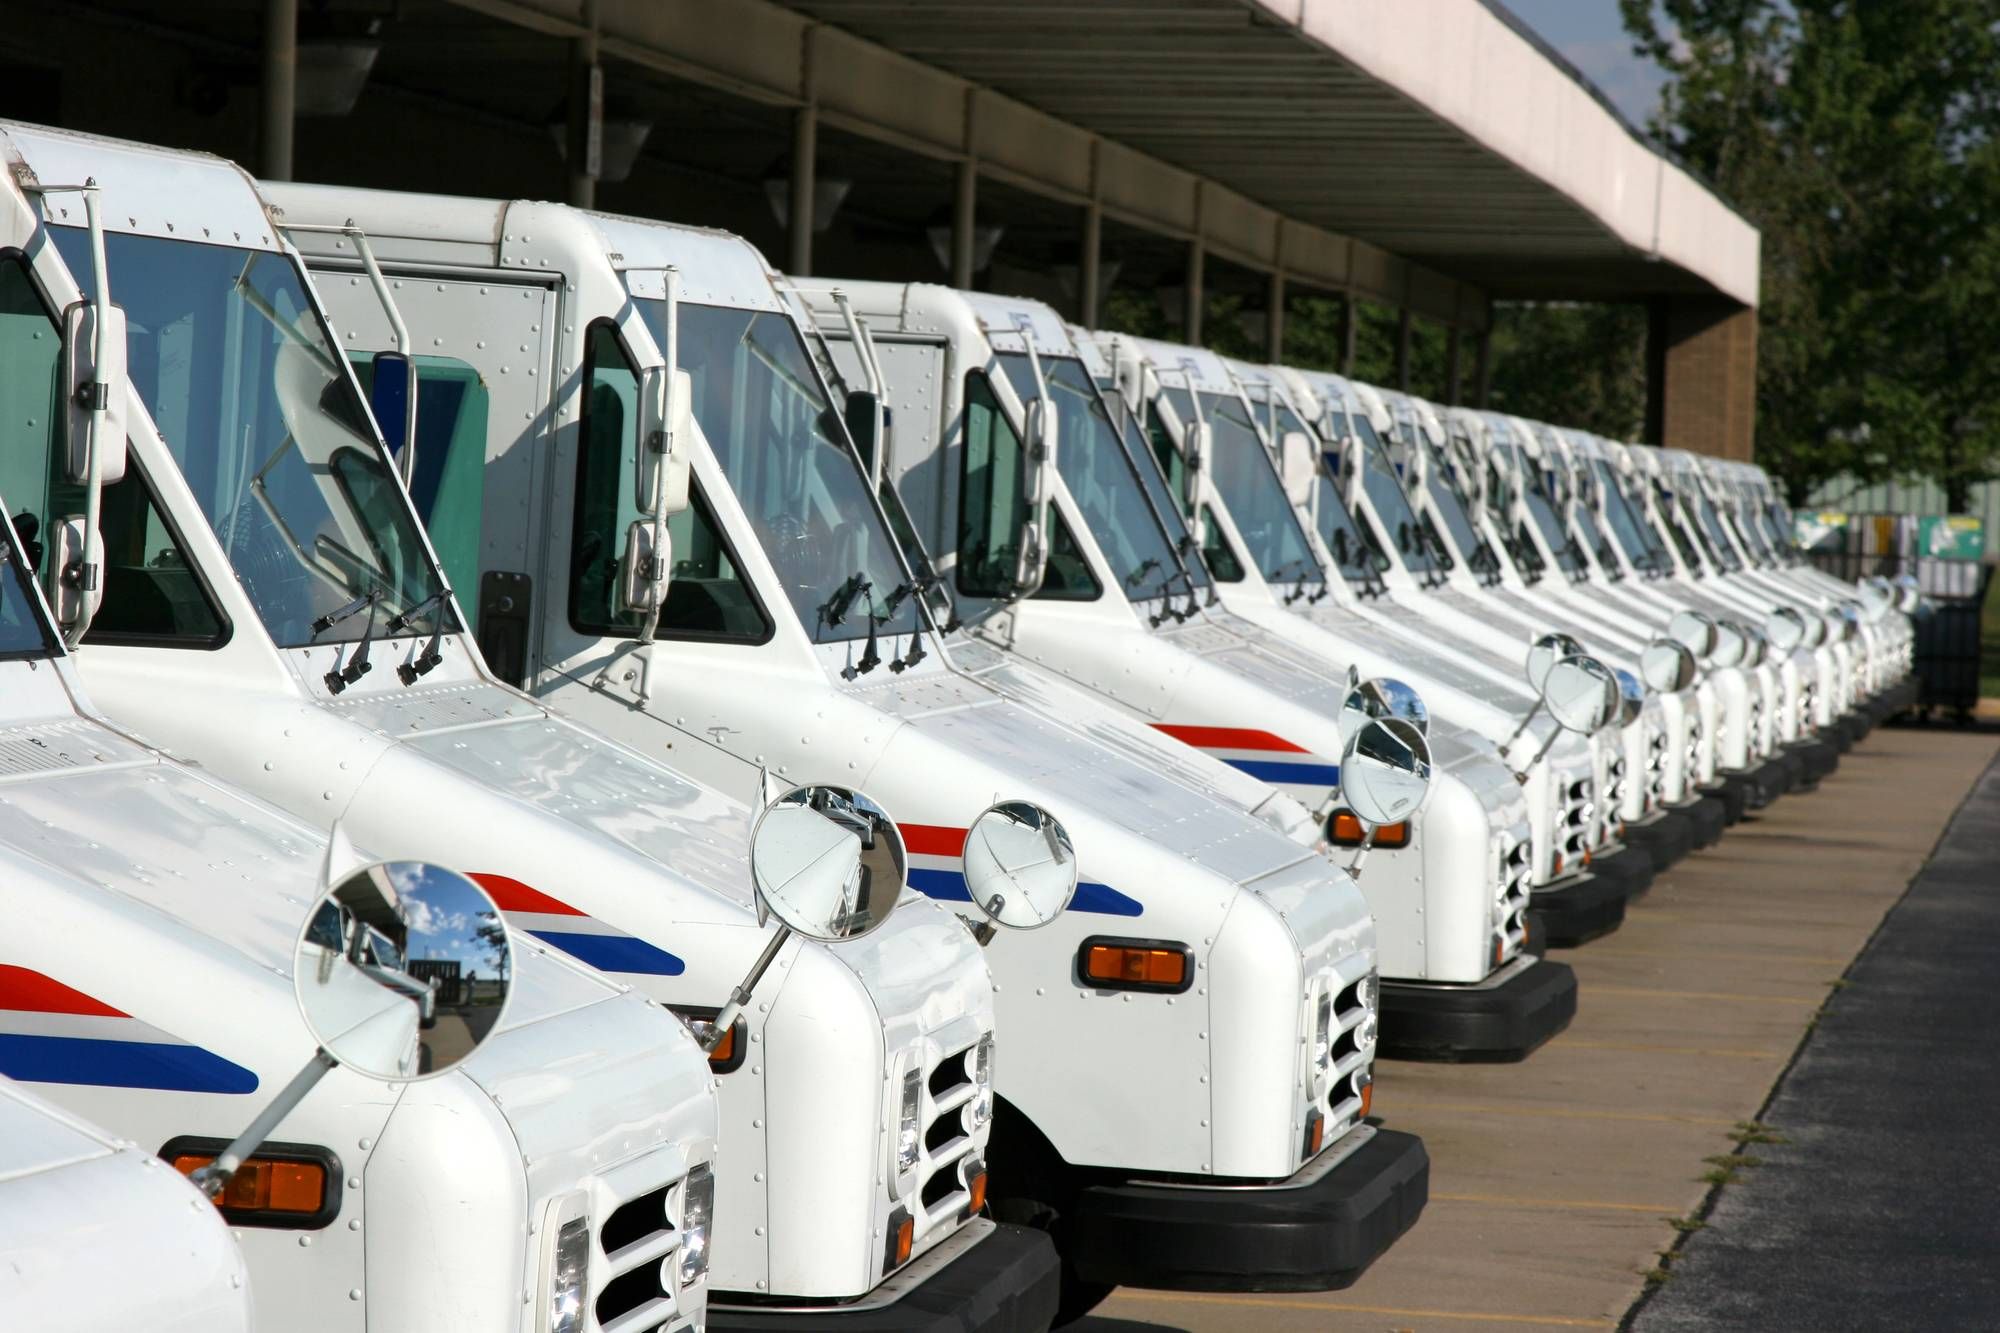 The U.S. Postal Service has allegedly been sabotaged before the 2020 election and mail-in voting.